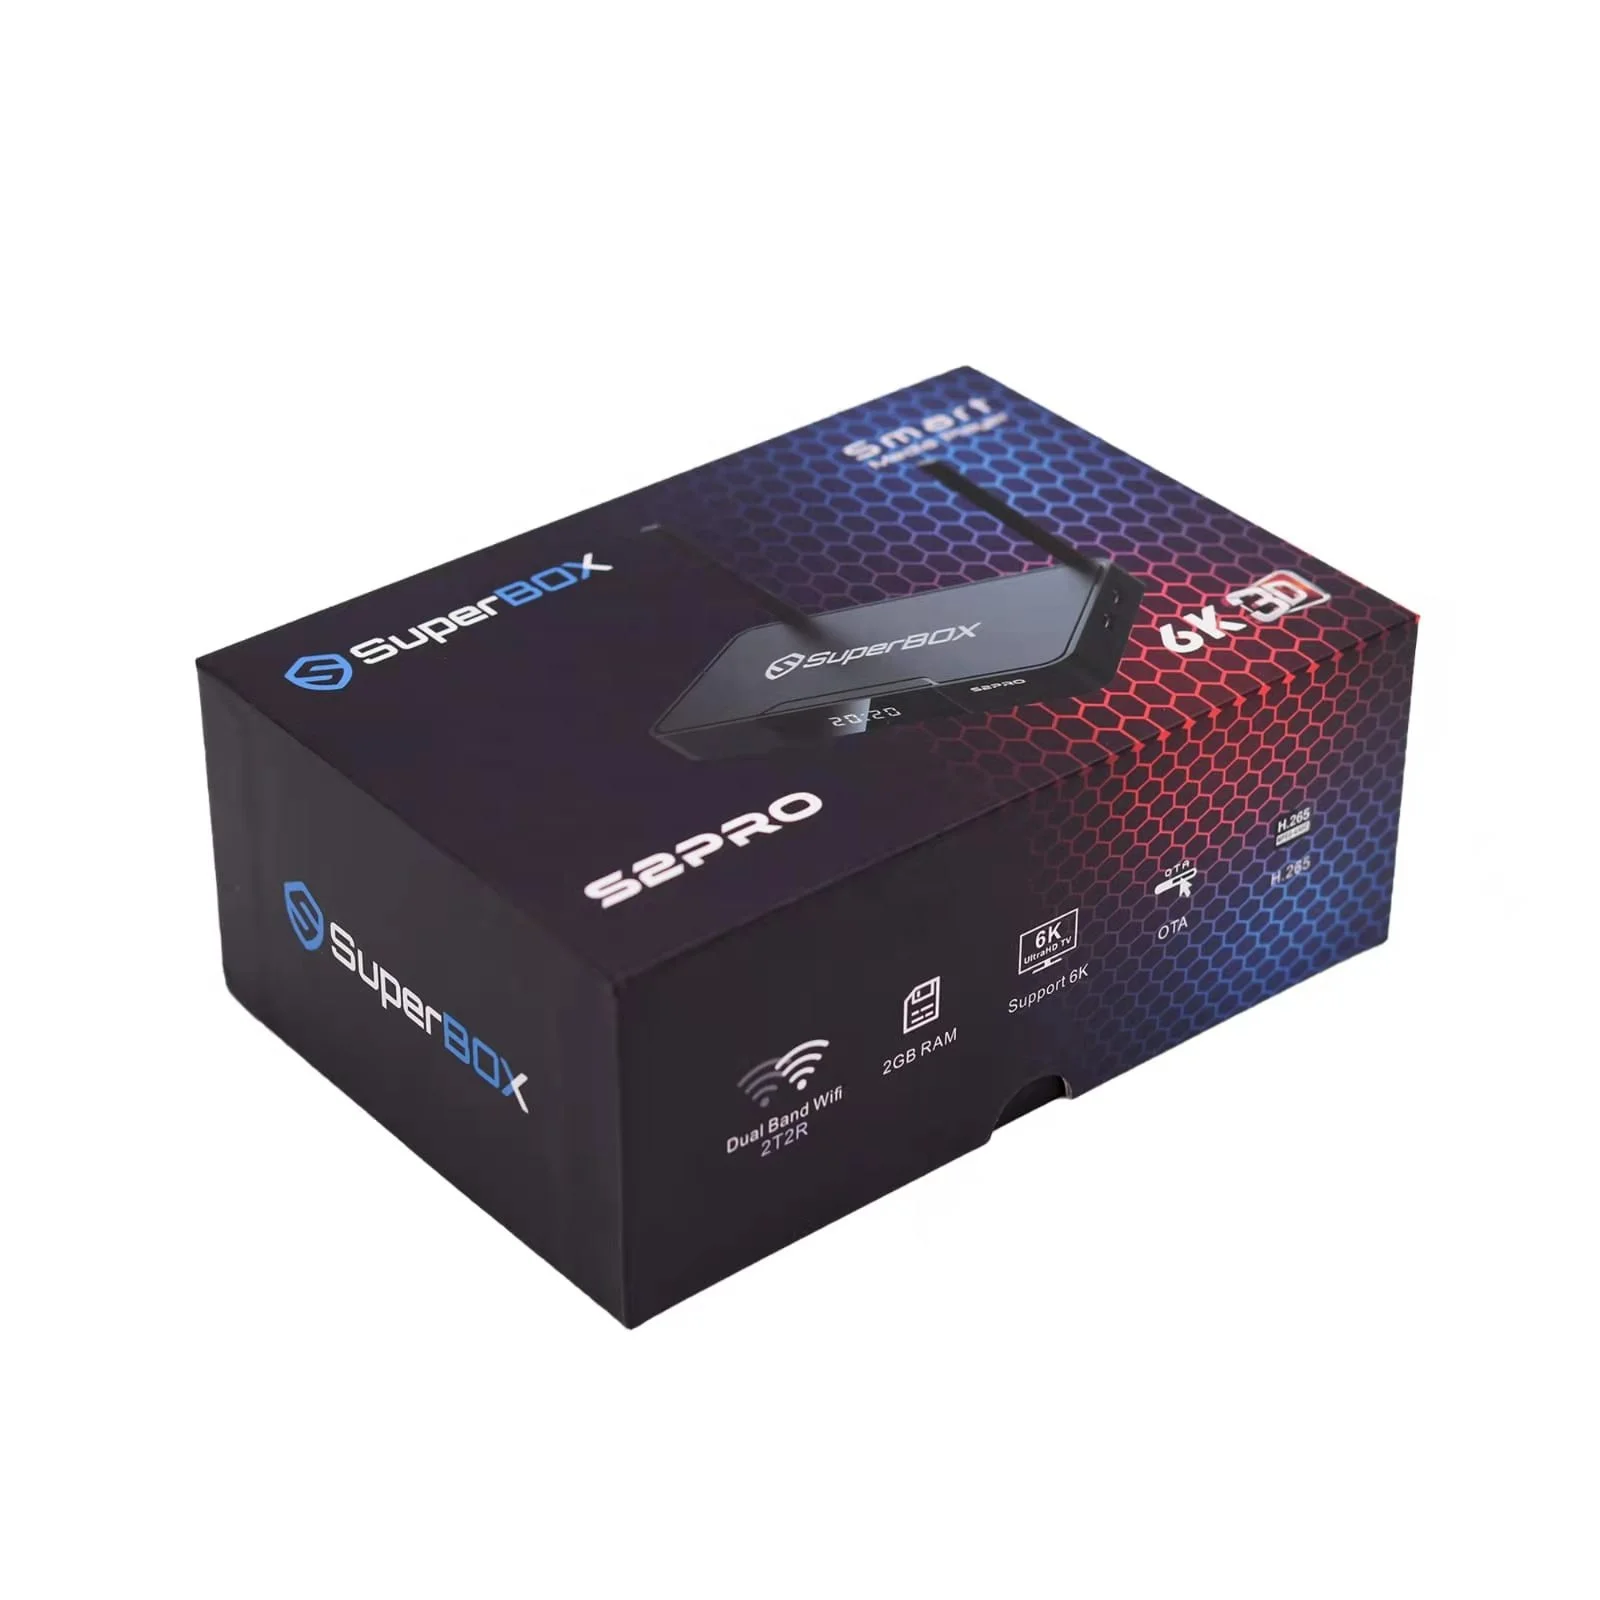 

Newest SuperBox S2 PRO IPTV Box Live TV USA No Monthly Fees Contact us for real price